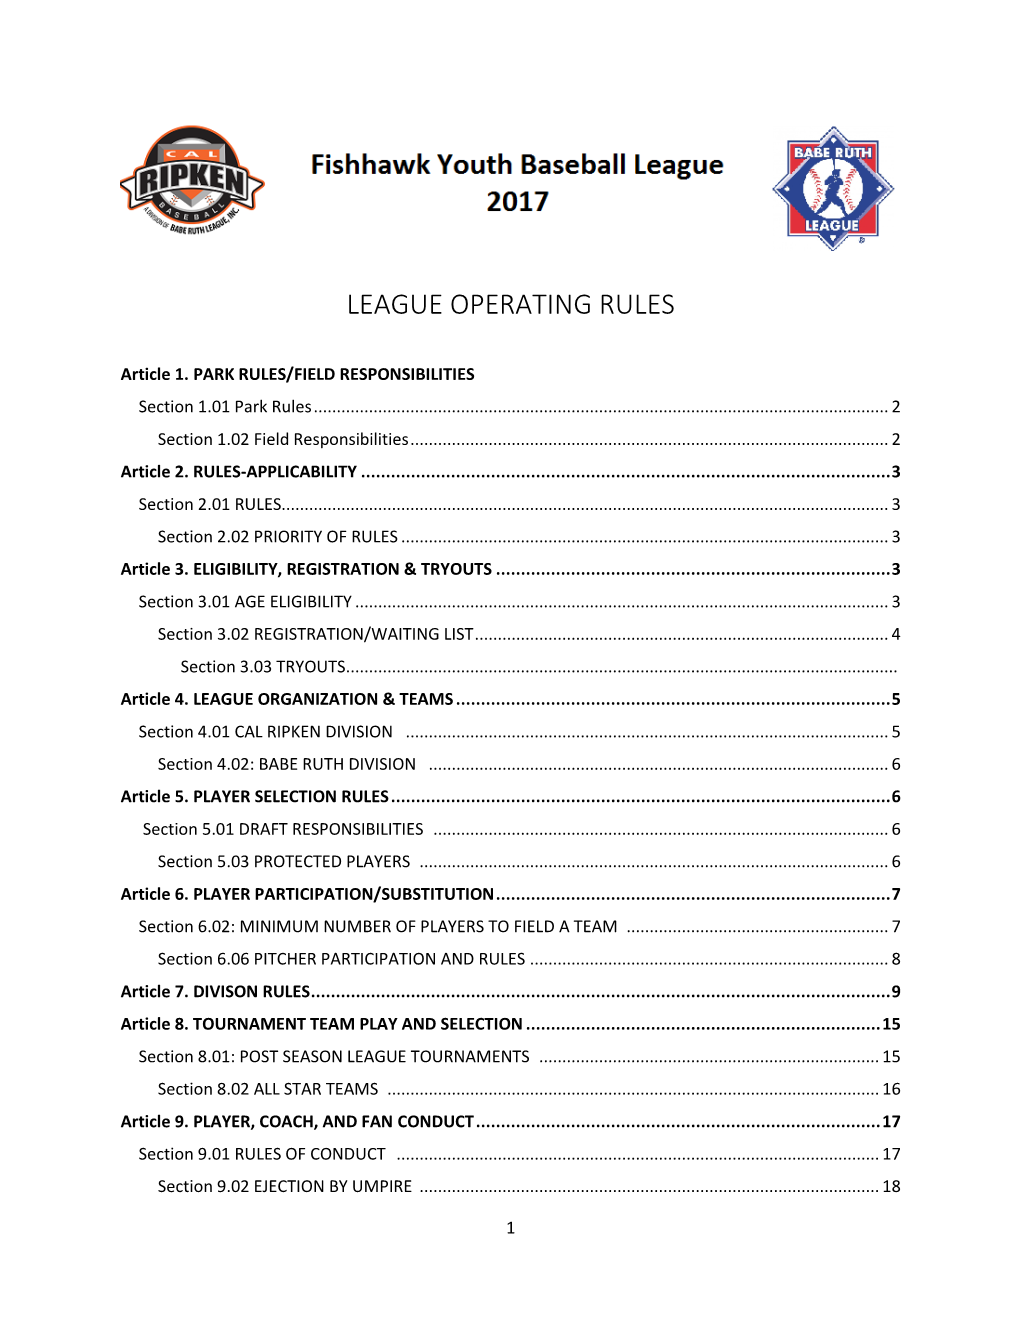 League Operating Rules